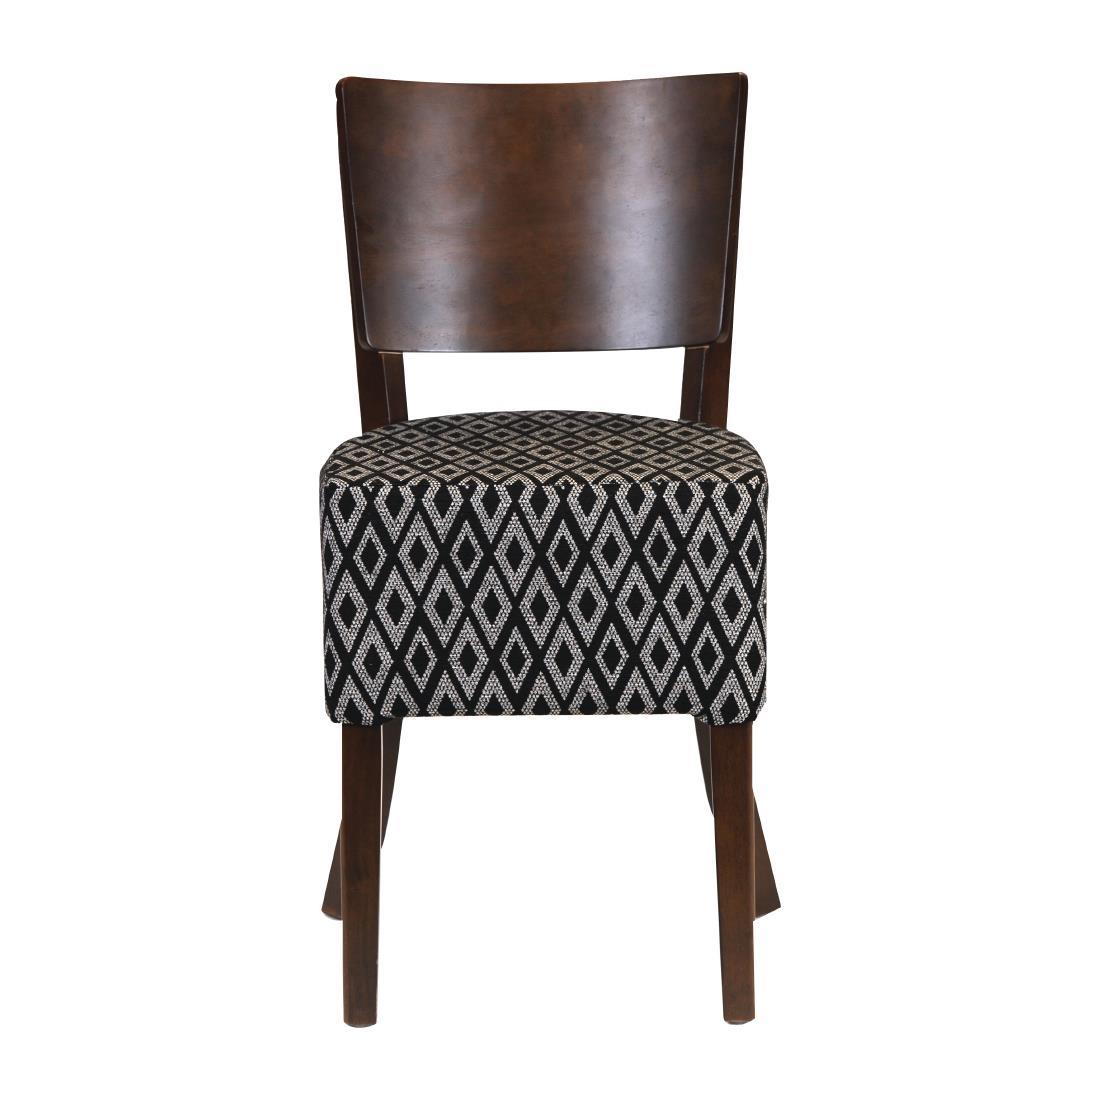 Asti Padded Dark Walnut Dining Chair with Blue Diamond Deep Padded Seat and Back (Pack of 2) - FT422  - 2